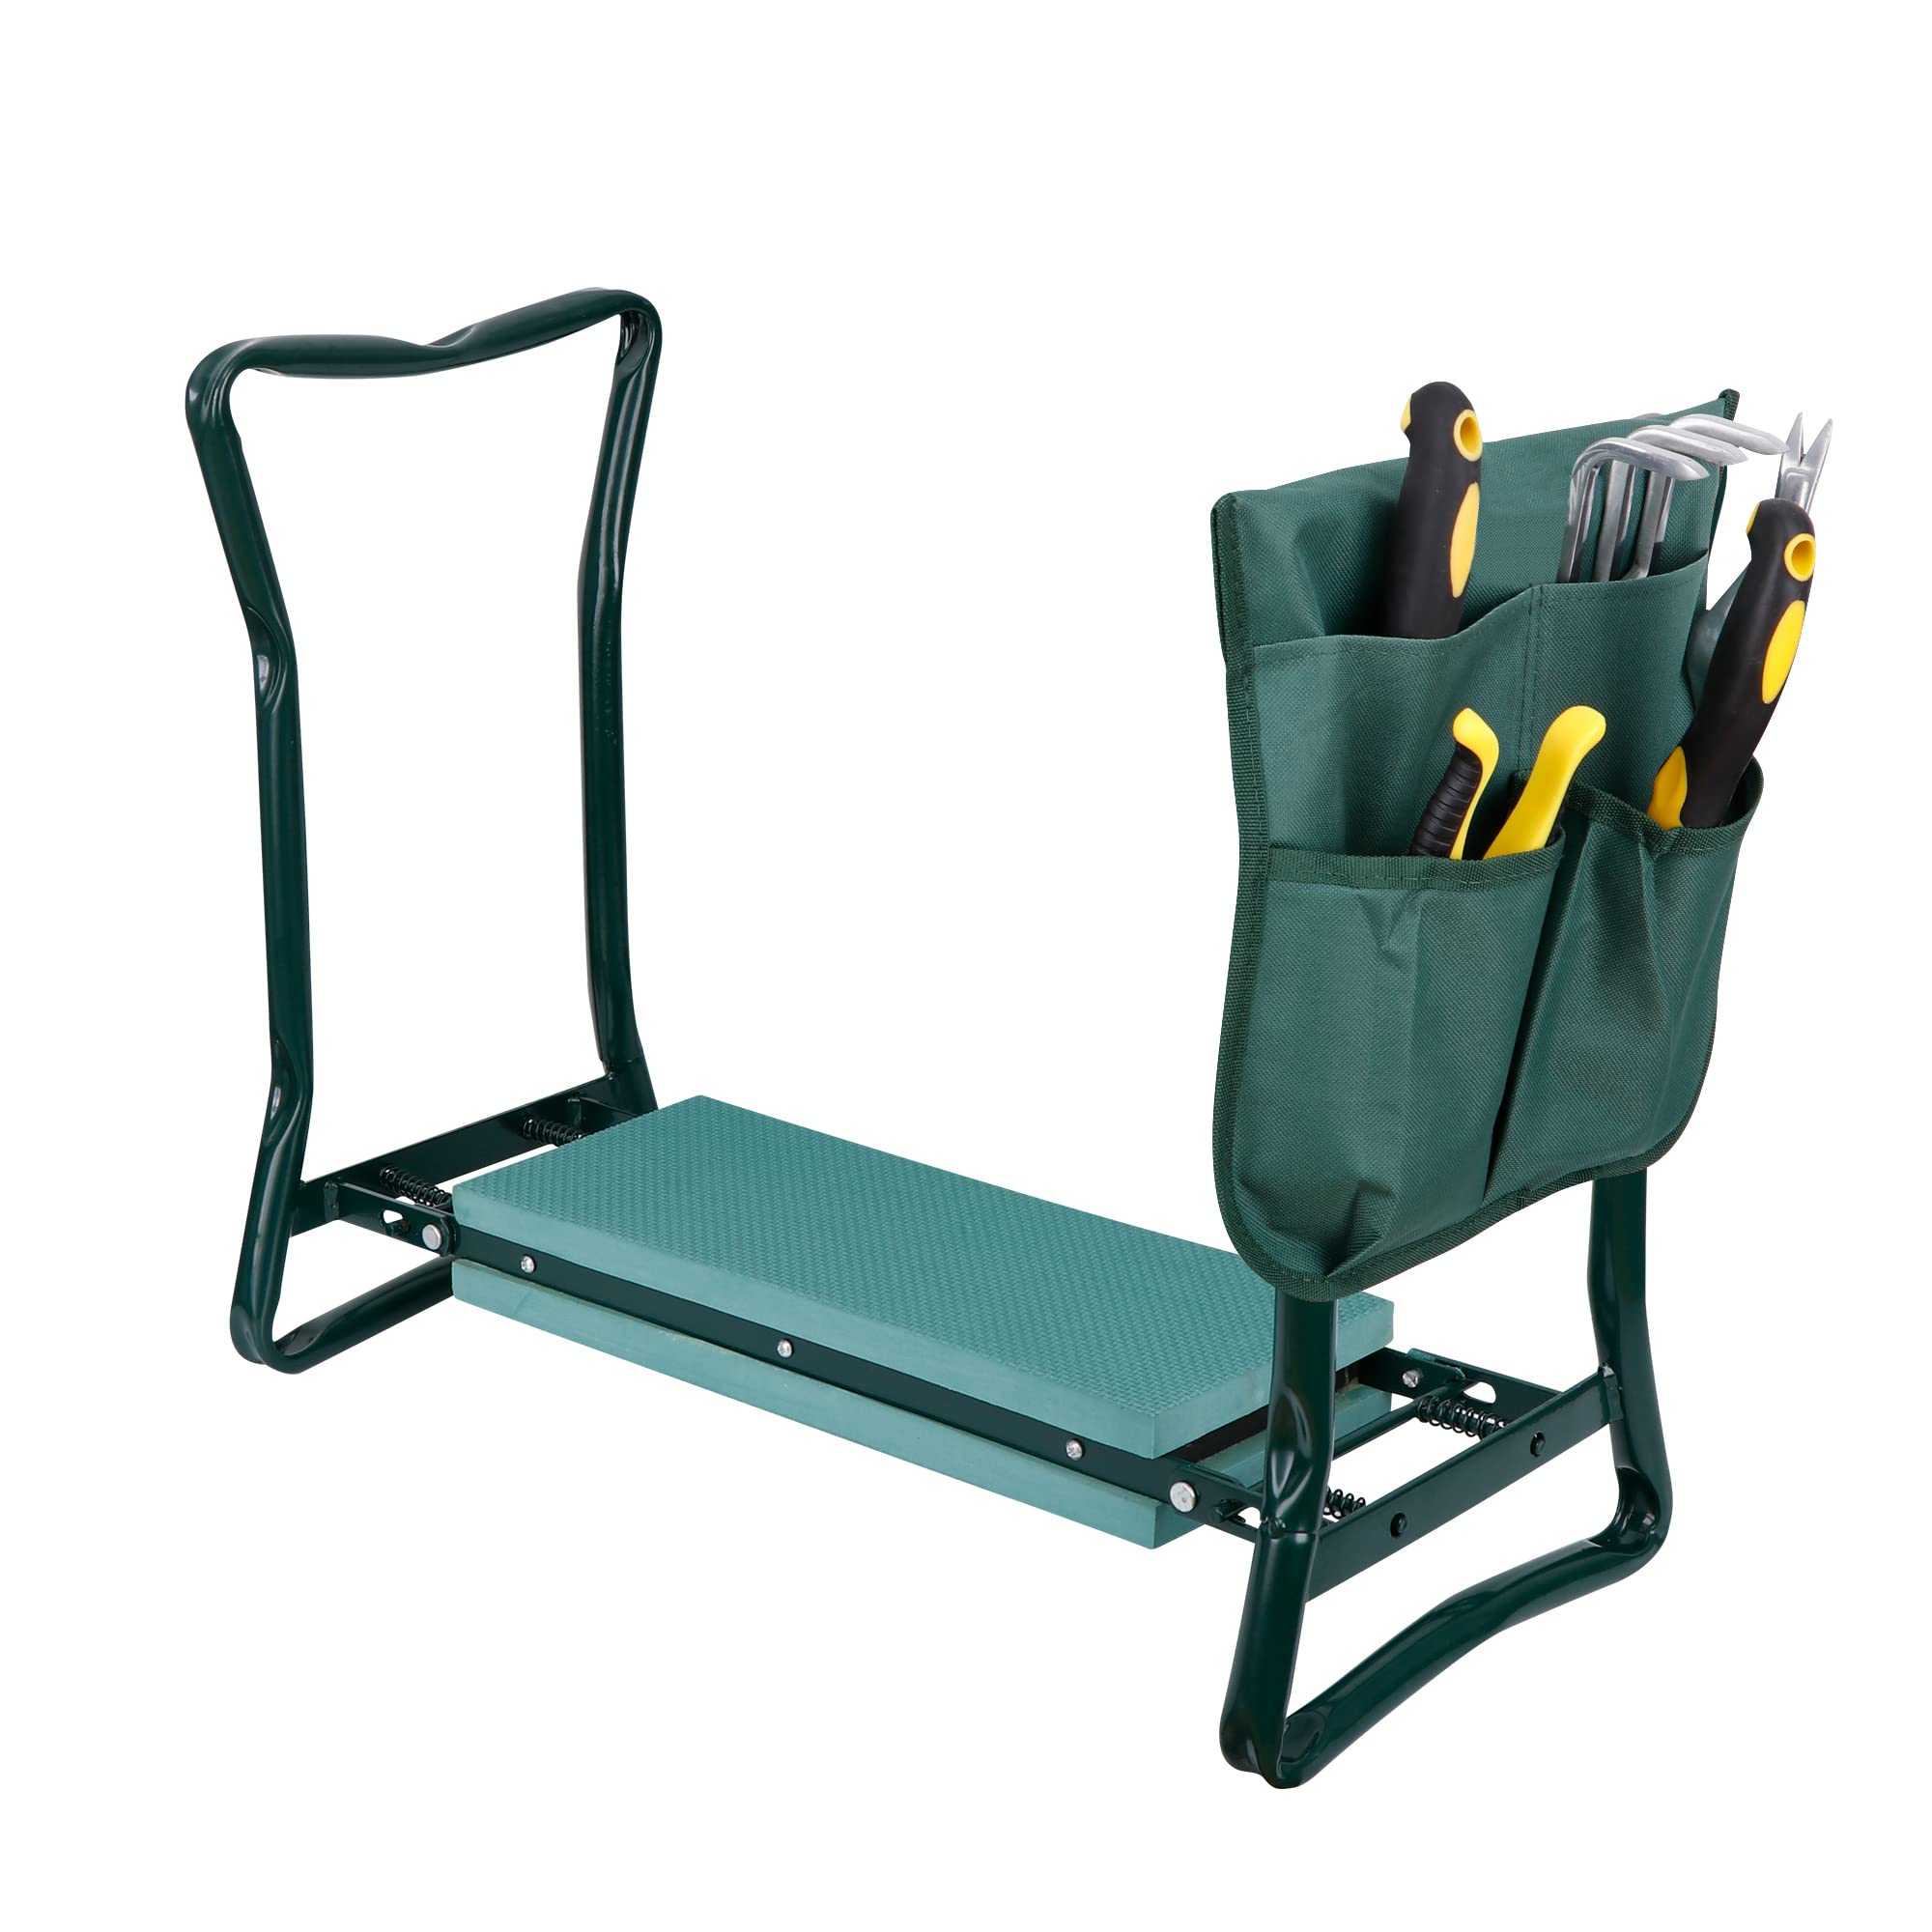 SUPER DEAL Newest Folding Garden Kneeler and Seat with Free Tool Pouches